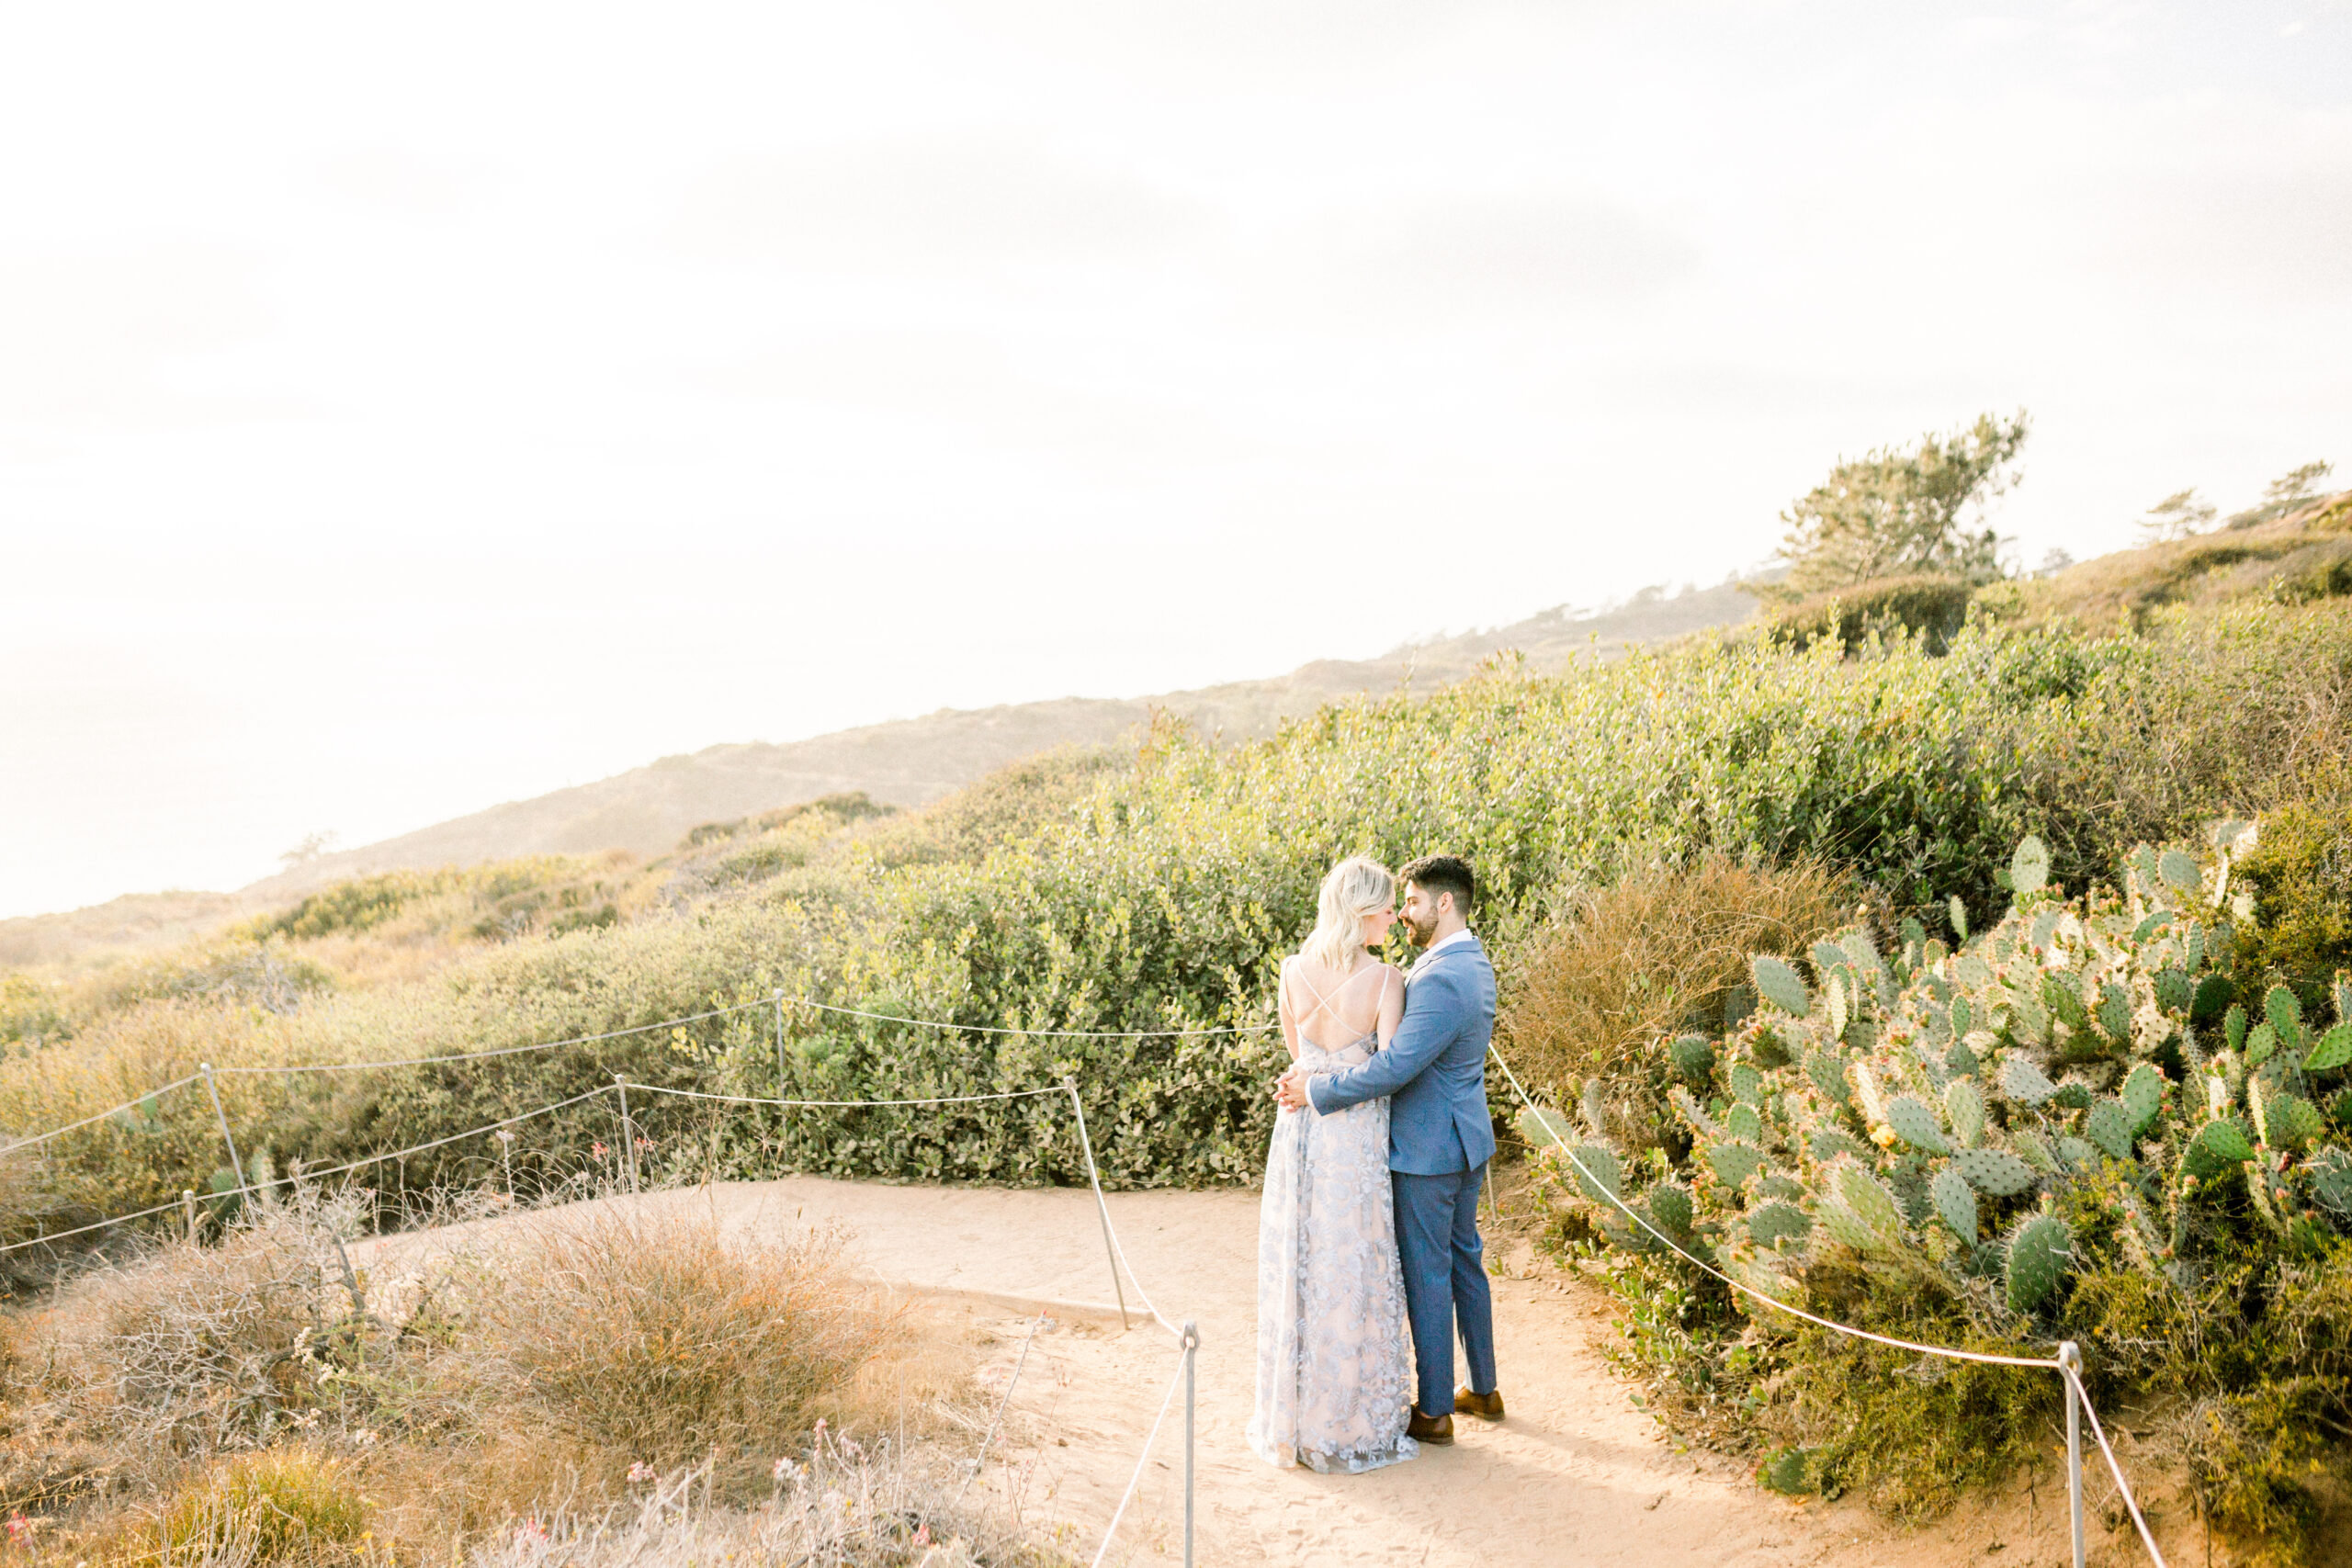 Kirsten & Ben couples engagement session at Torrey Pines by Pattengale Photography in San Diego California